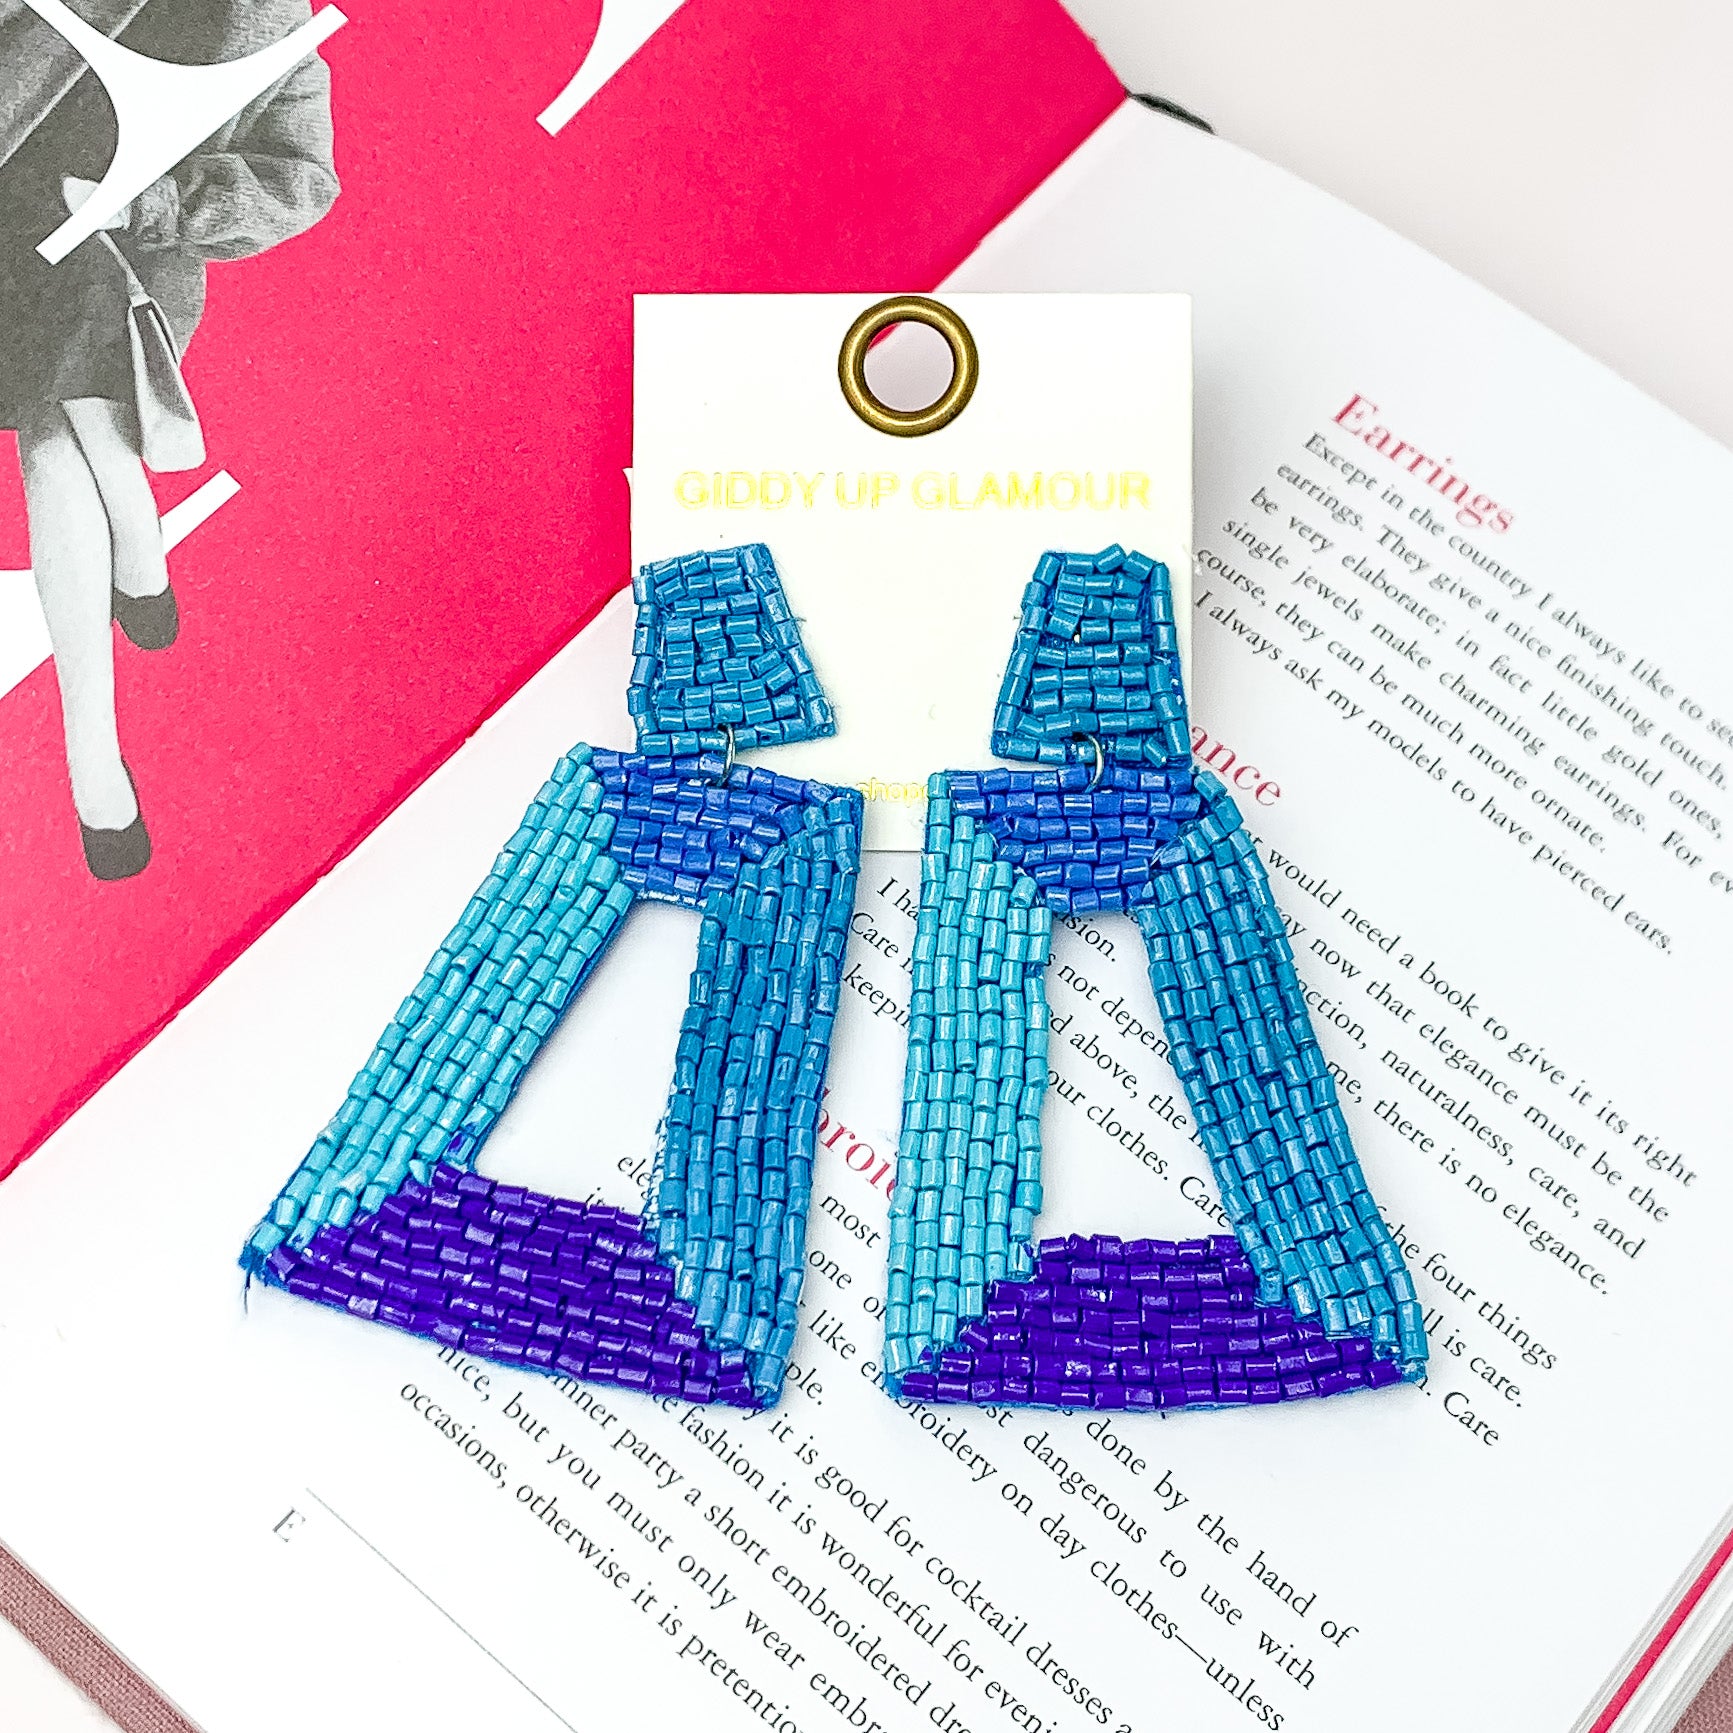 Beaded Rectangle Designed Earrings in Shades of Blue. Pictured on a white background with an open book behind the earrings. 